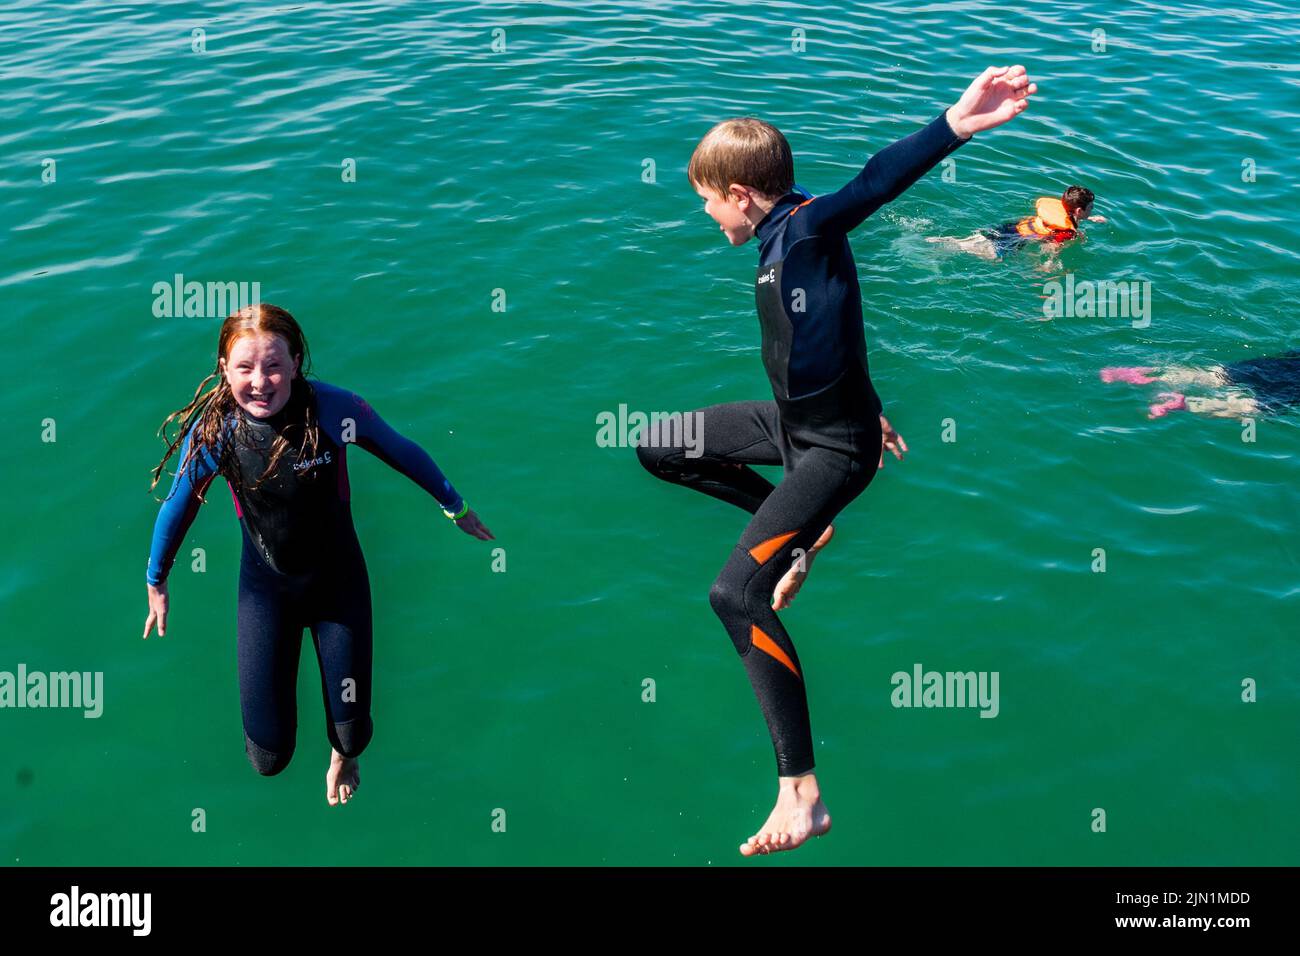 Rosscarbery, West Cork, Ireland. 8th Aug, 2022. Rosscarbery Pier was very busy today with people taking a dip and jumping into the water to cool off on a day with temperatures hitting 21C. Enjoying the sunny weather were Mary and Paddy O'Regan from Clonakilty. Credit: AG News/Alamy Live News Stock Photo